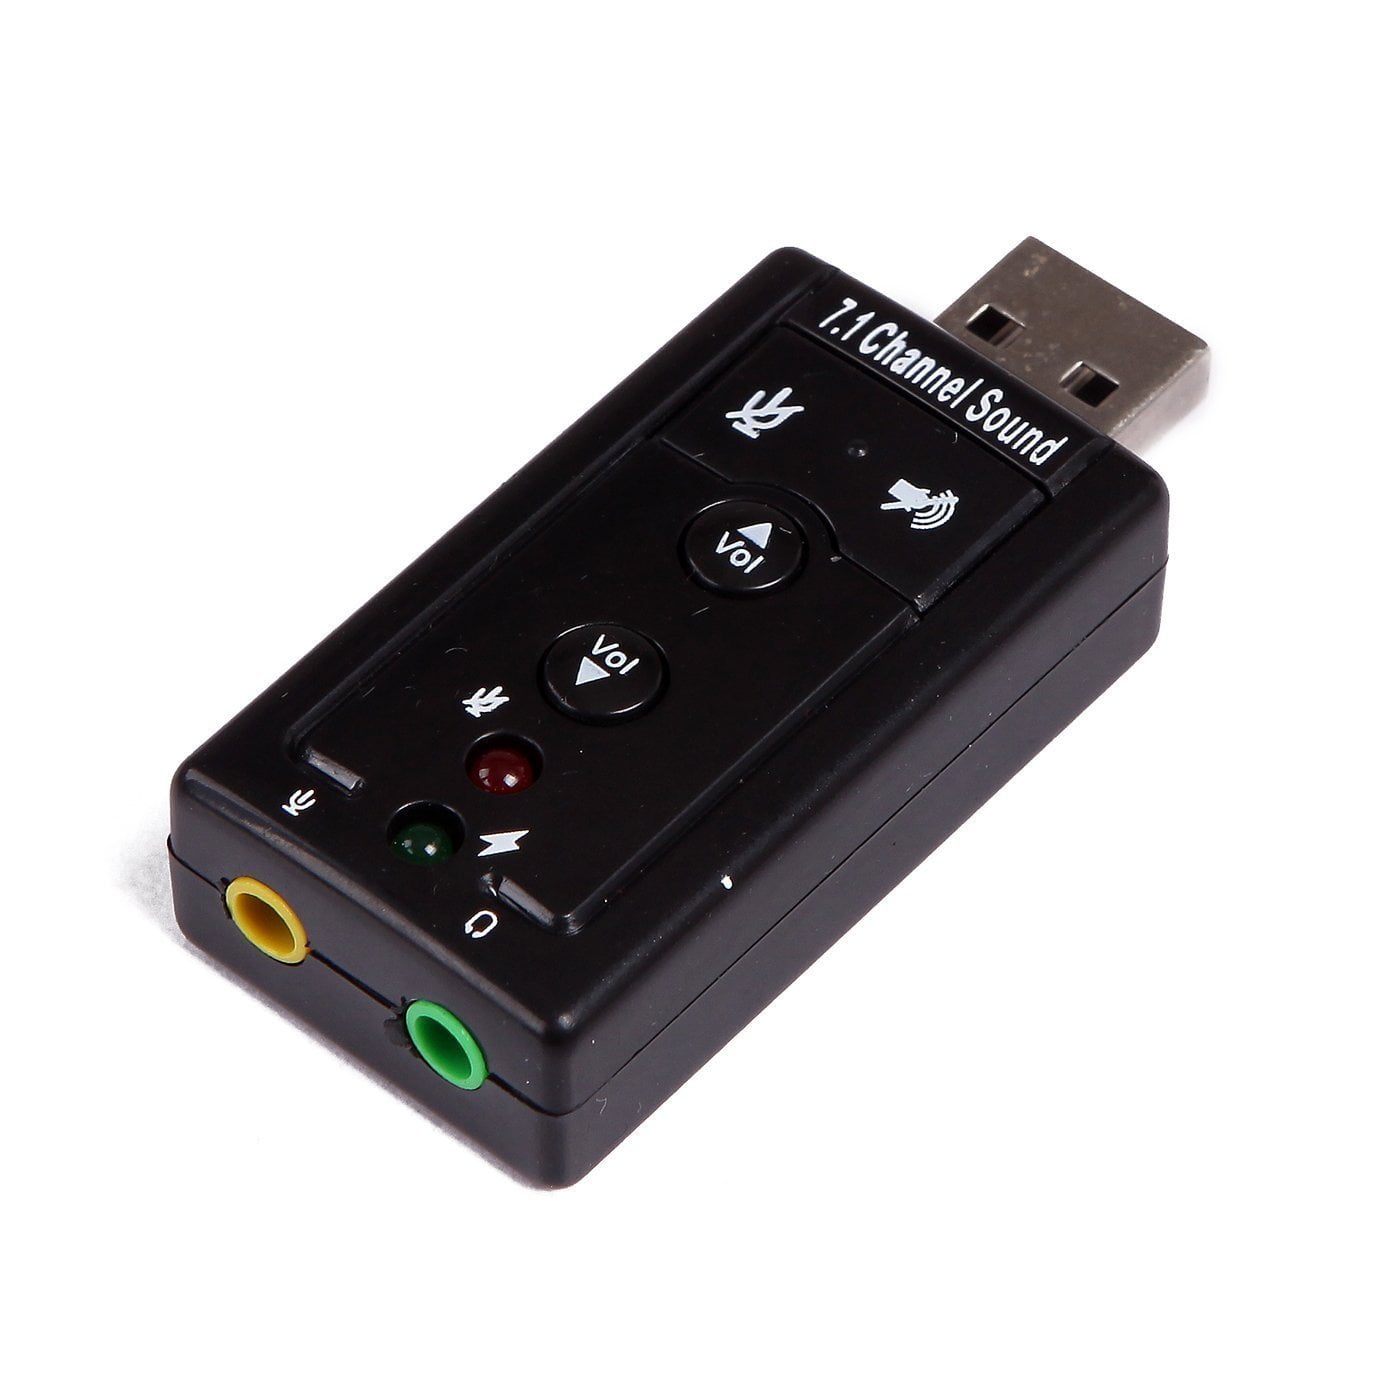 External USB Sound Card 7.1 Channel 3D Audio Adapter with 3.5mm Headset MIC